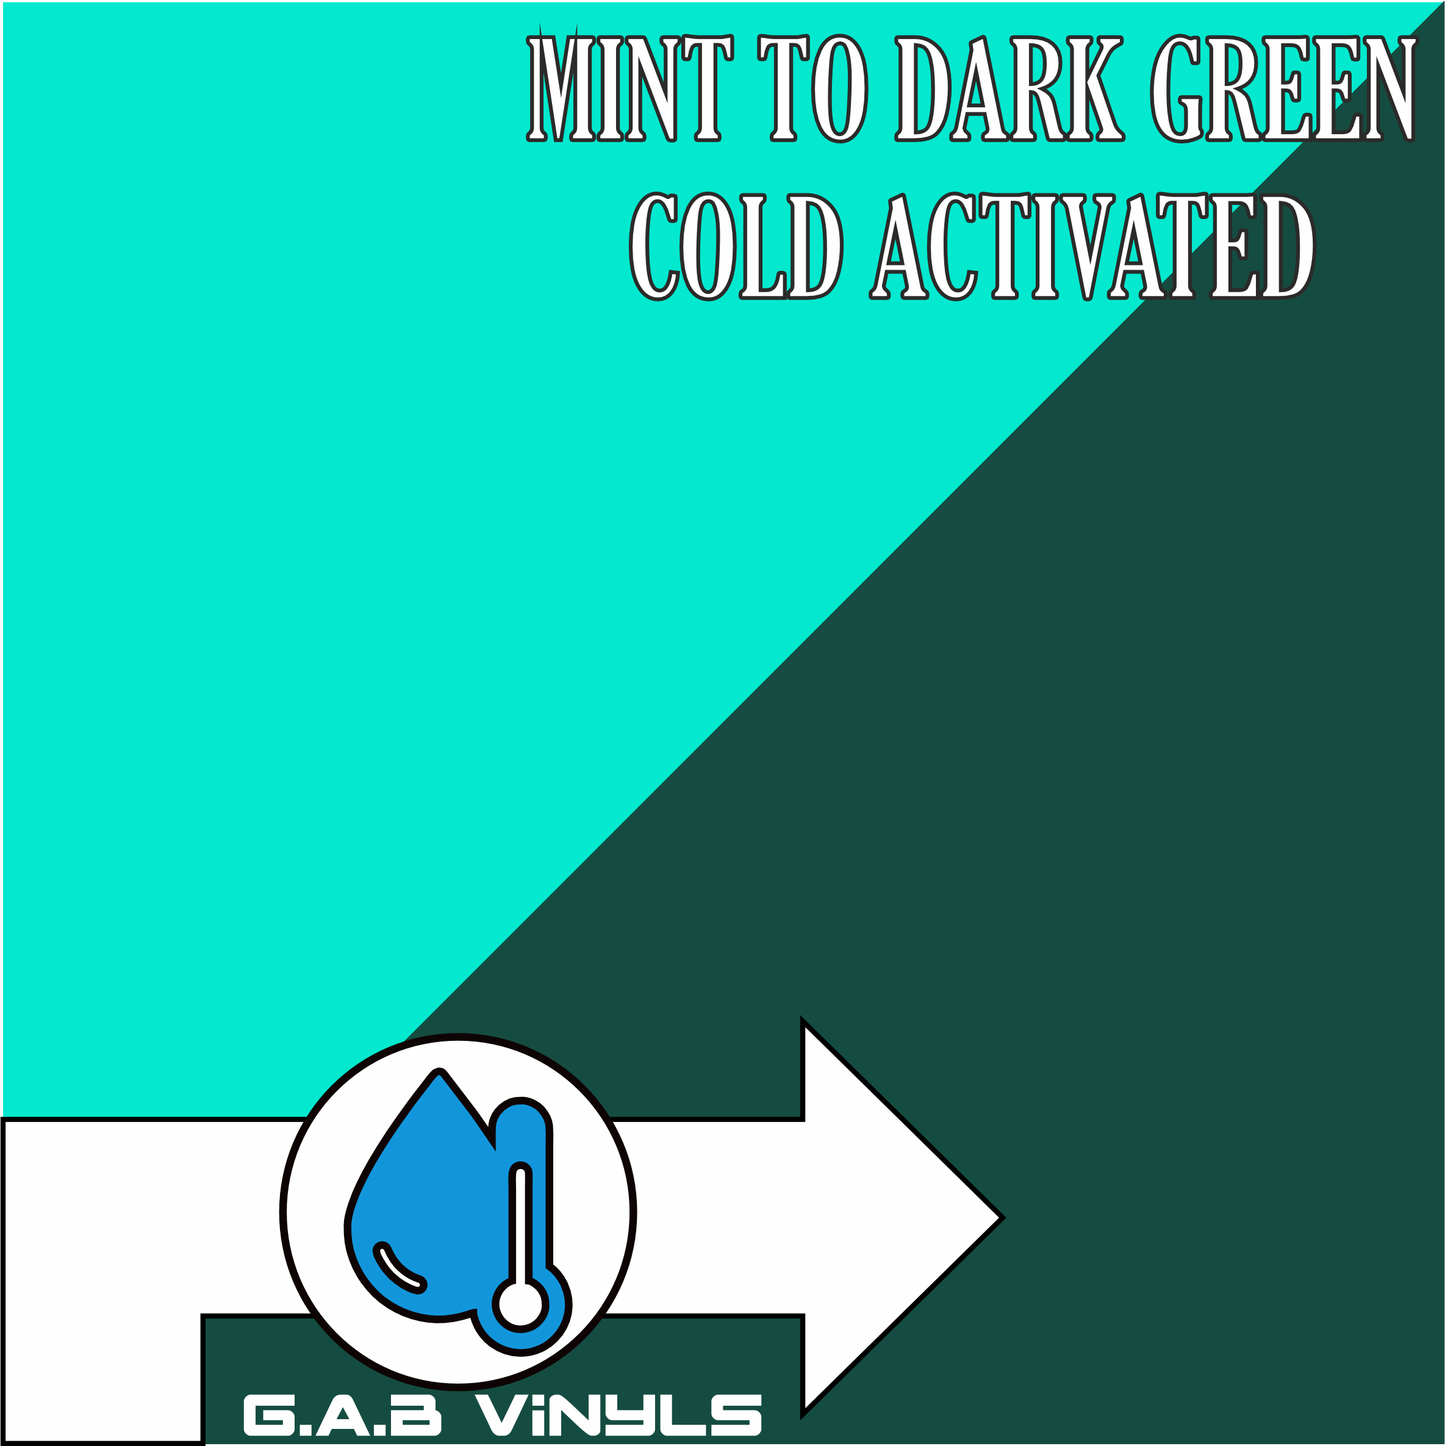 Cold Activated :- Mint to Dark Green - Metre